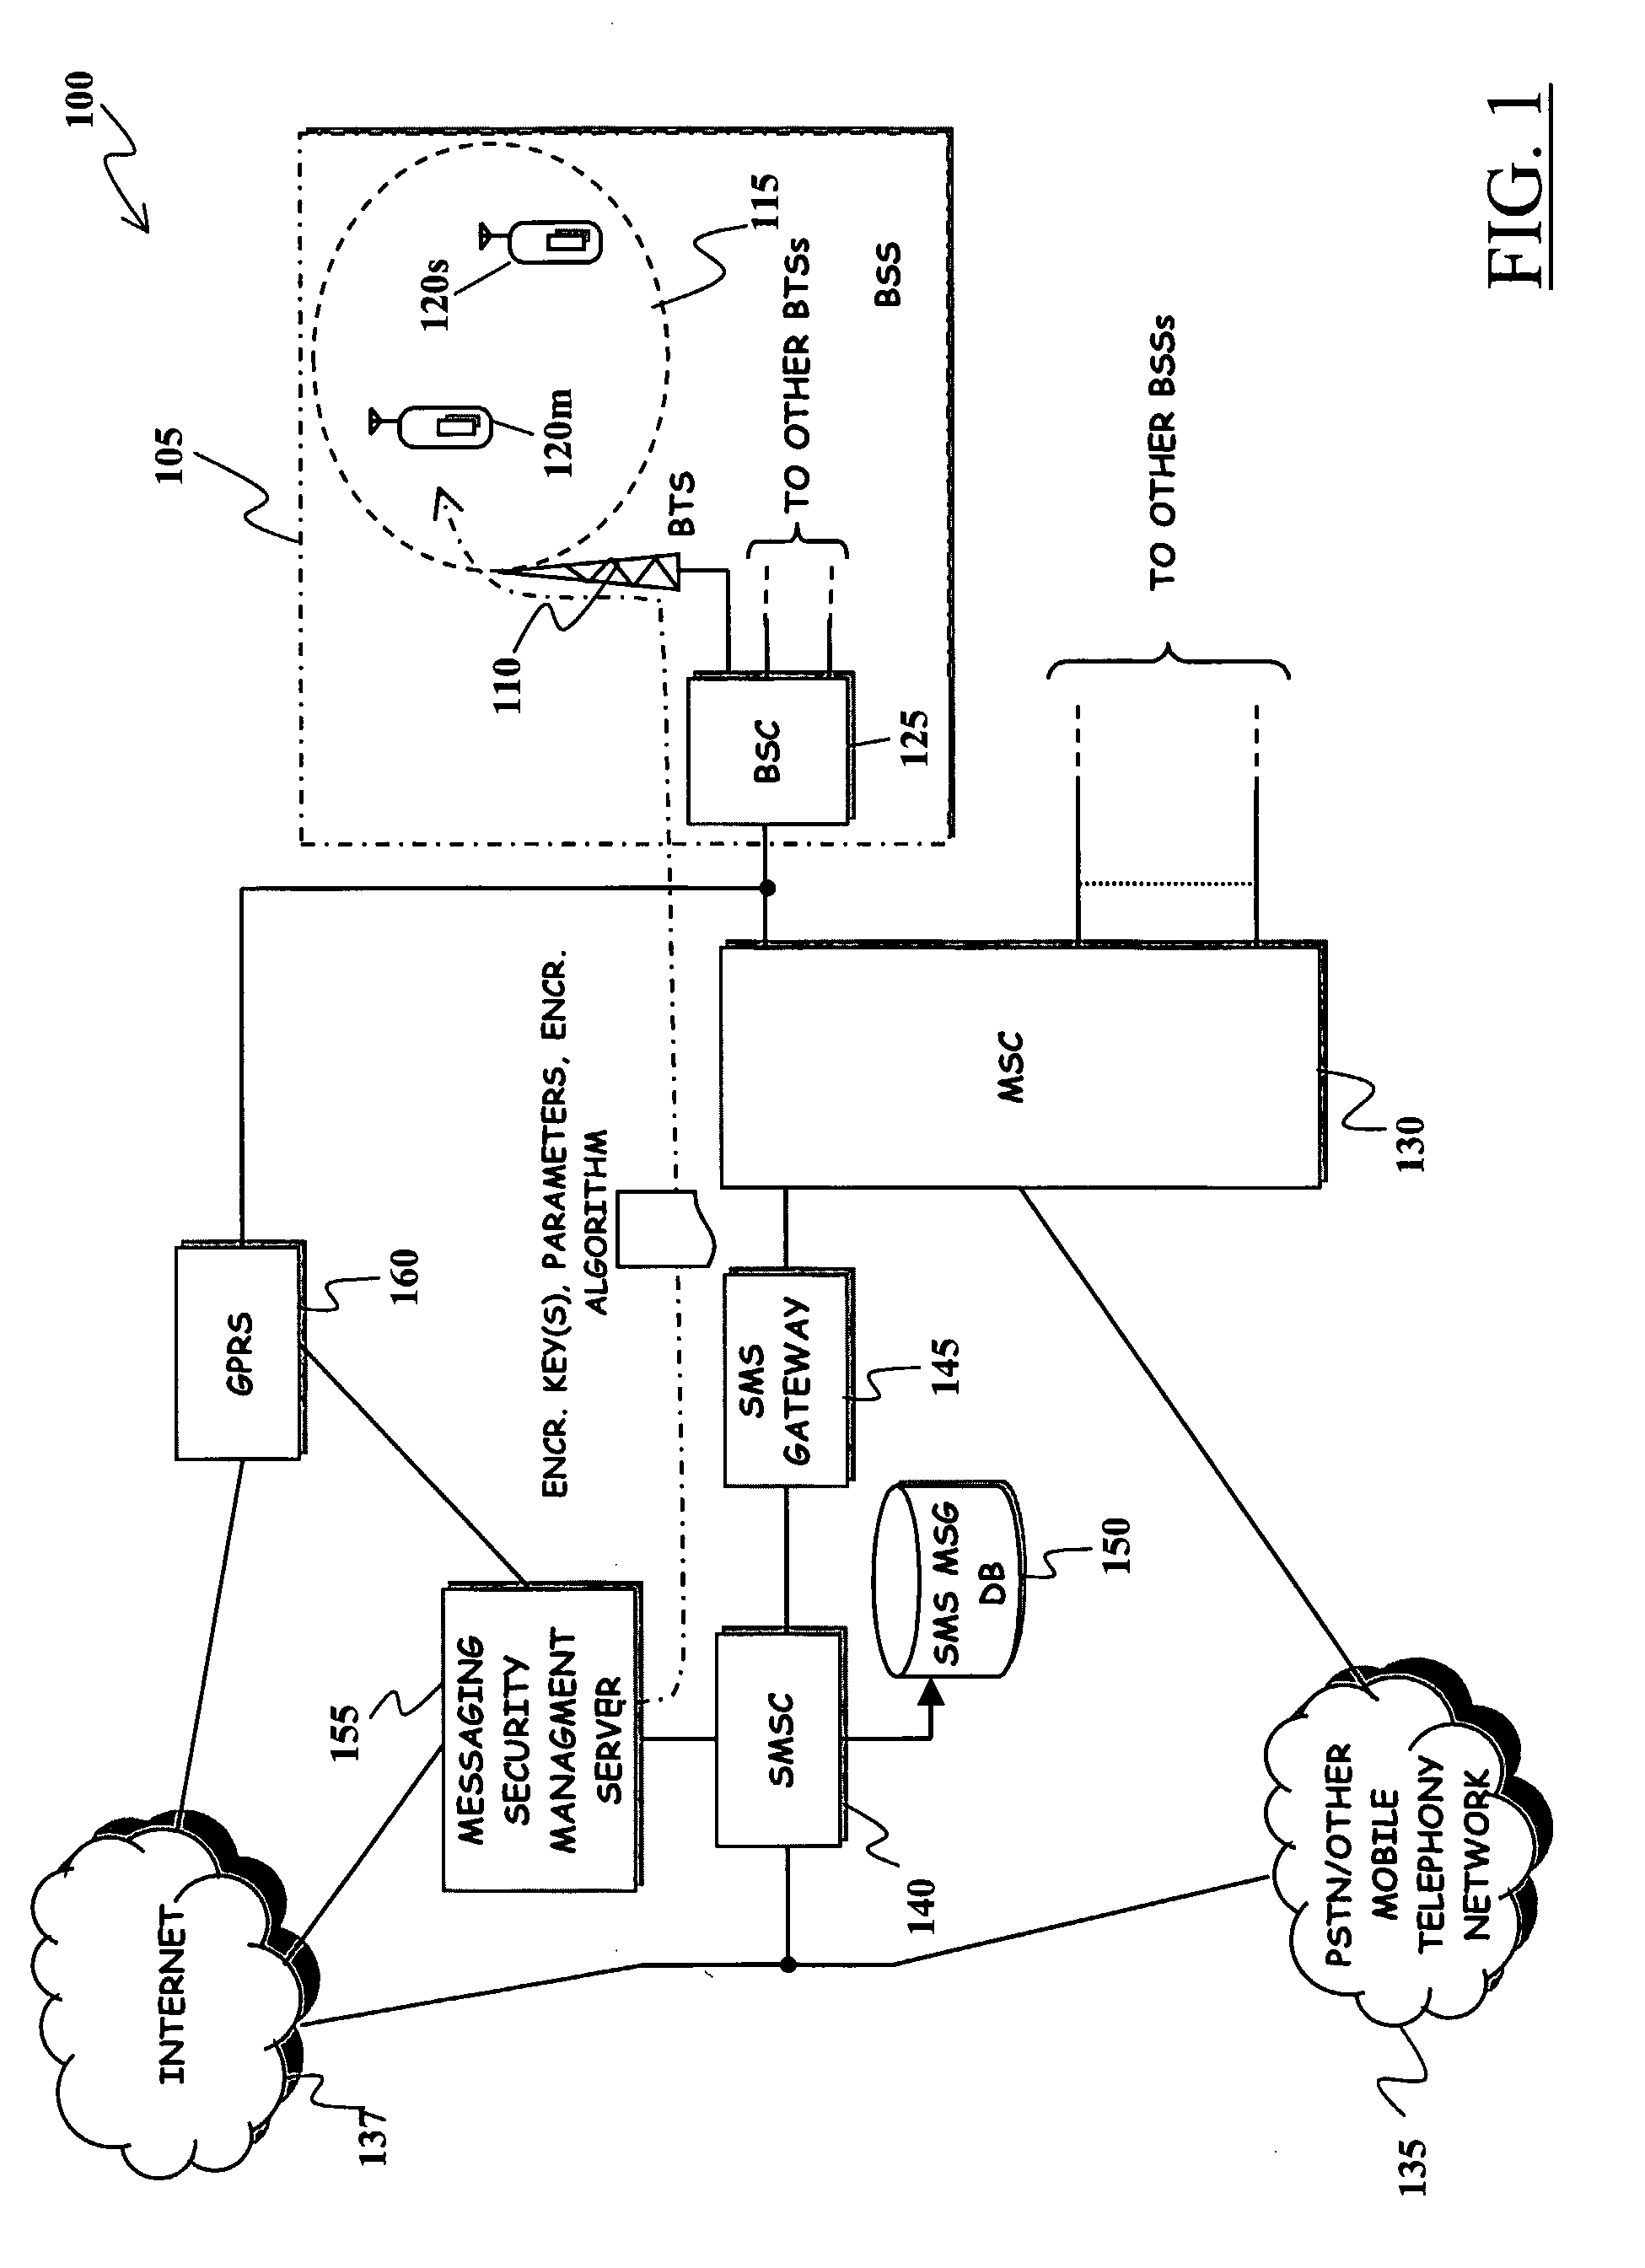 Method and System for Improving Robustness of Secure Messaging in a Mobile Communications Network